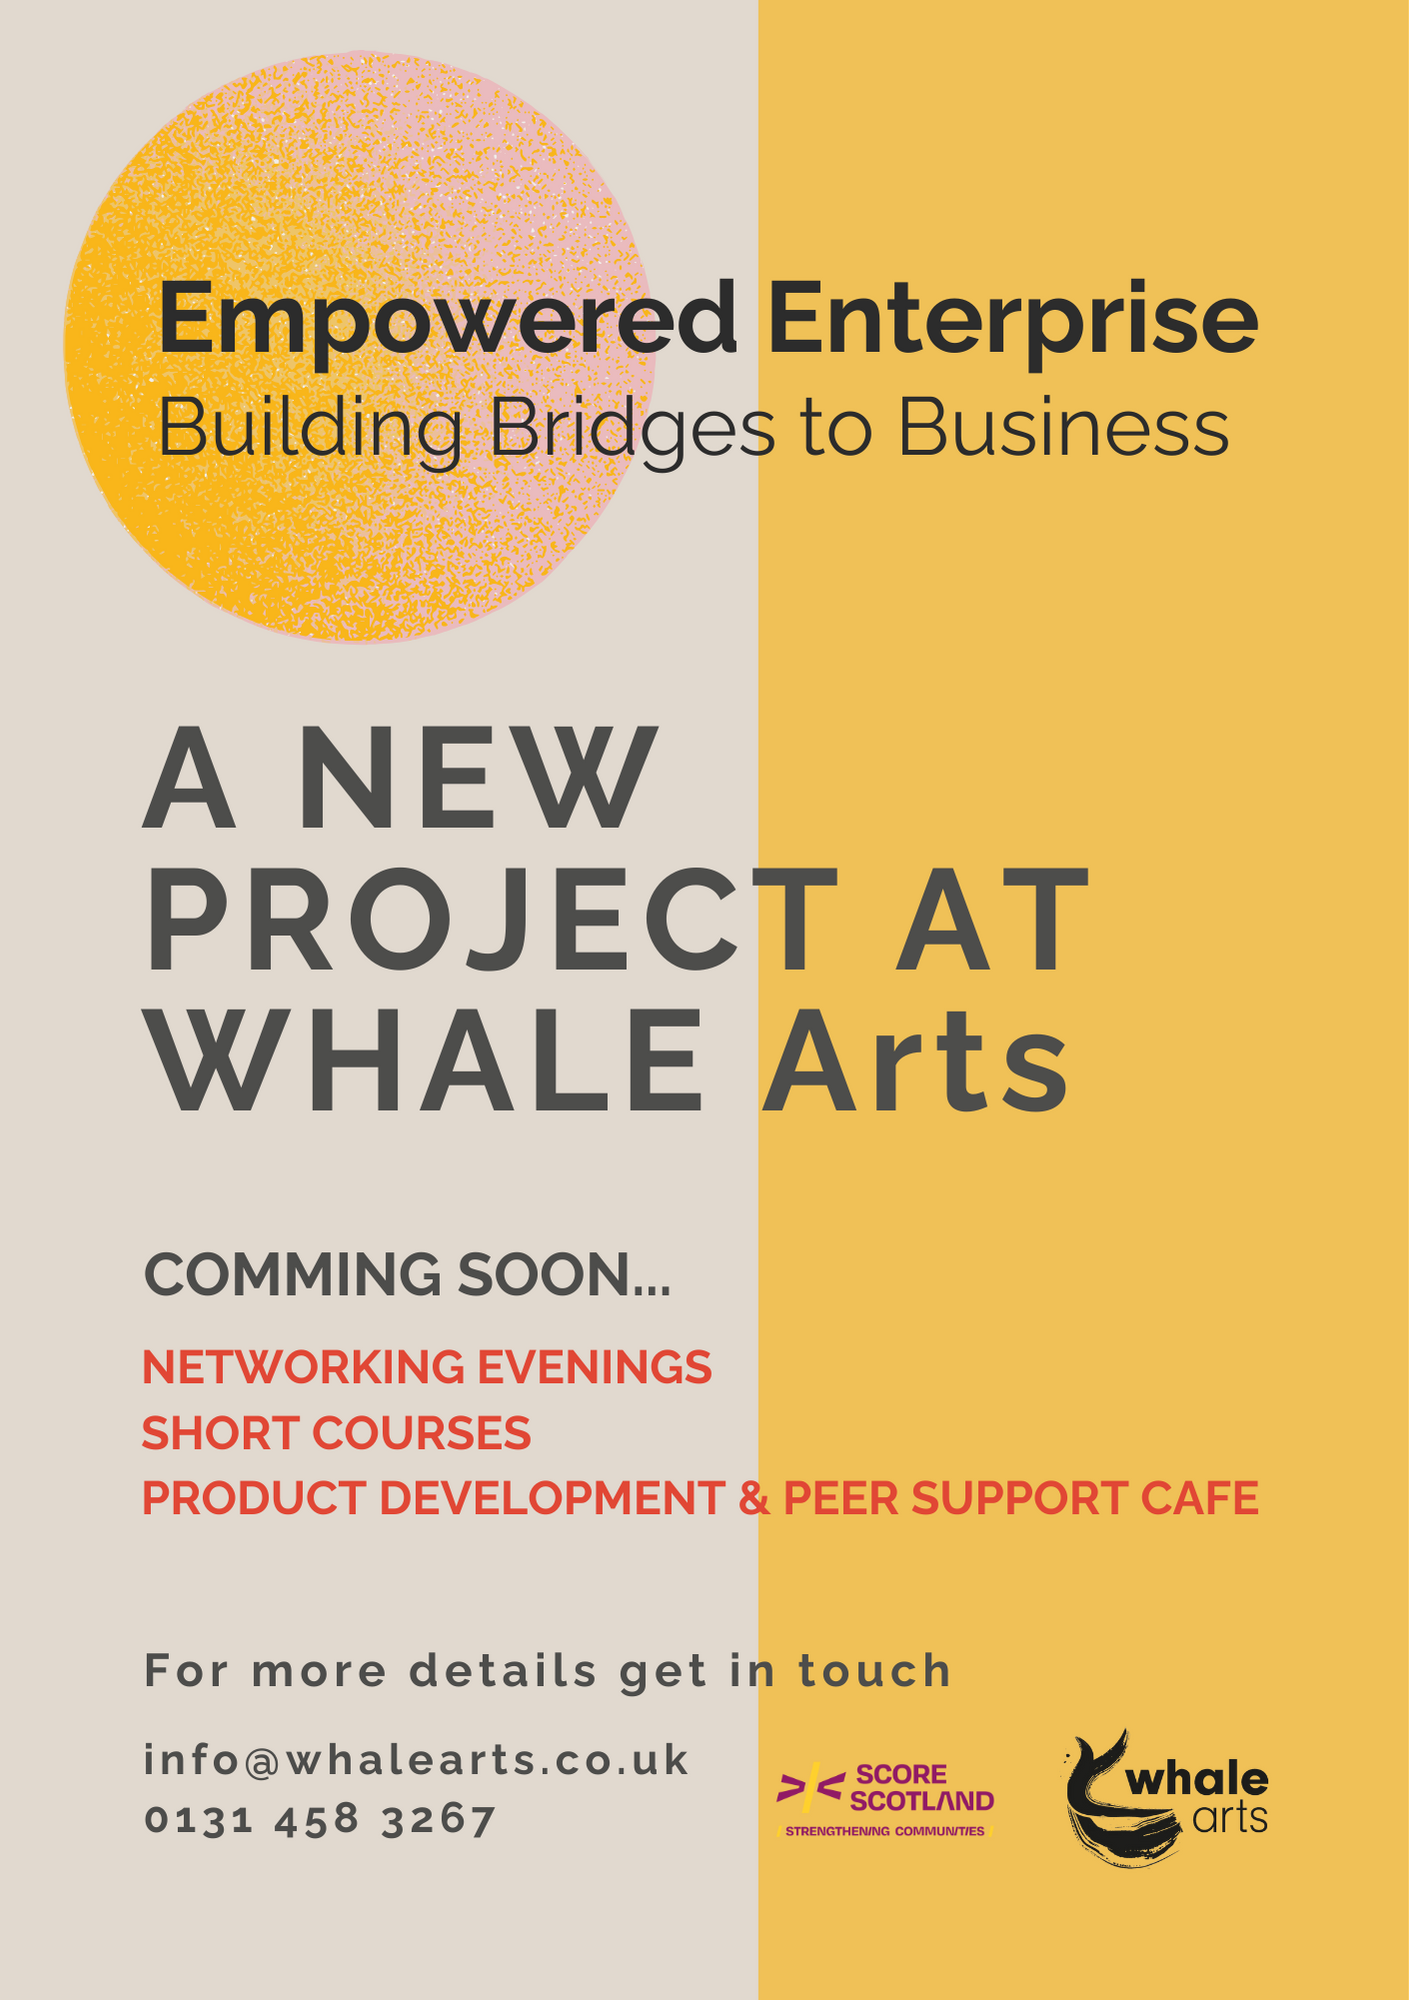 Empowered Enterprise with whale arts